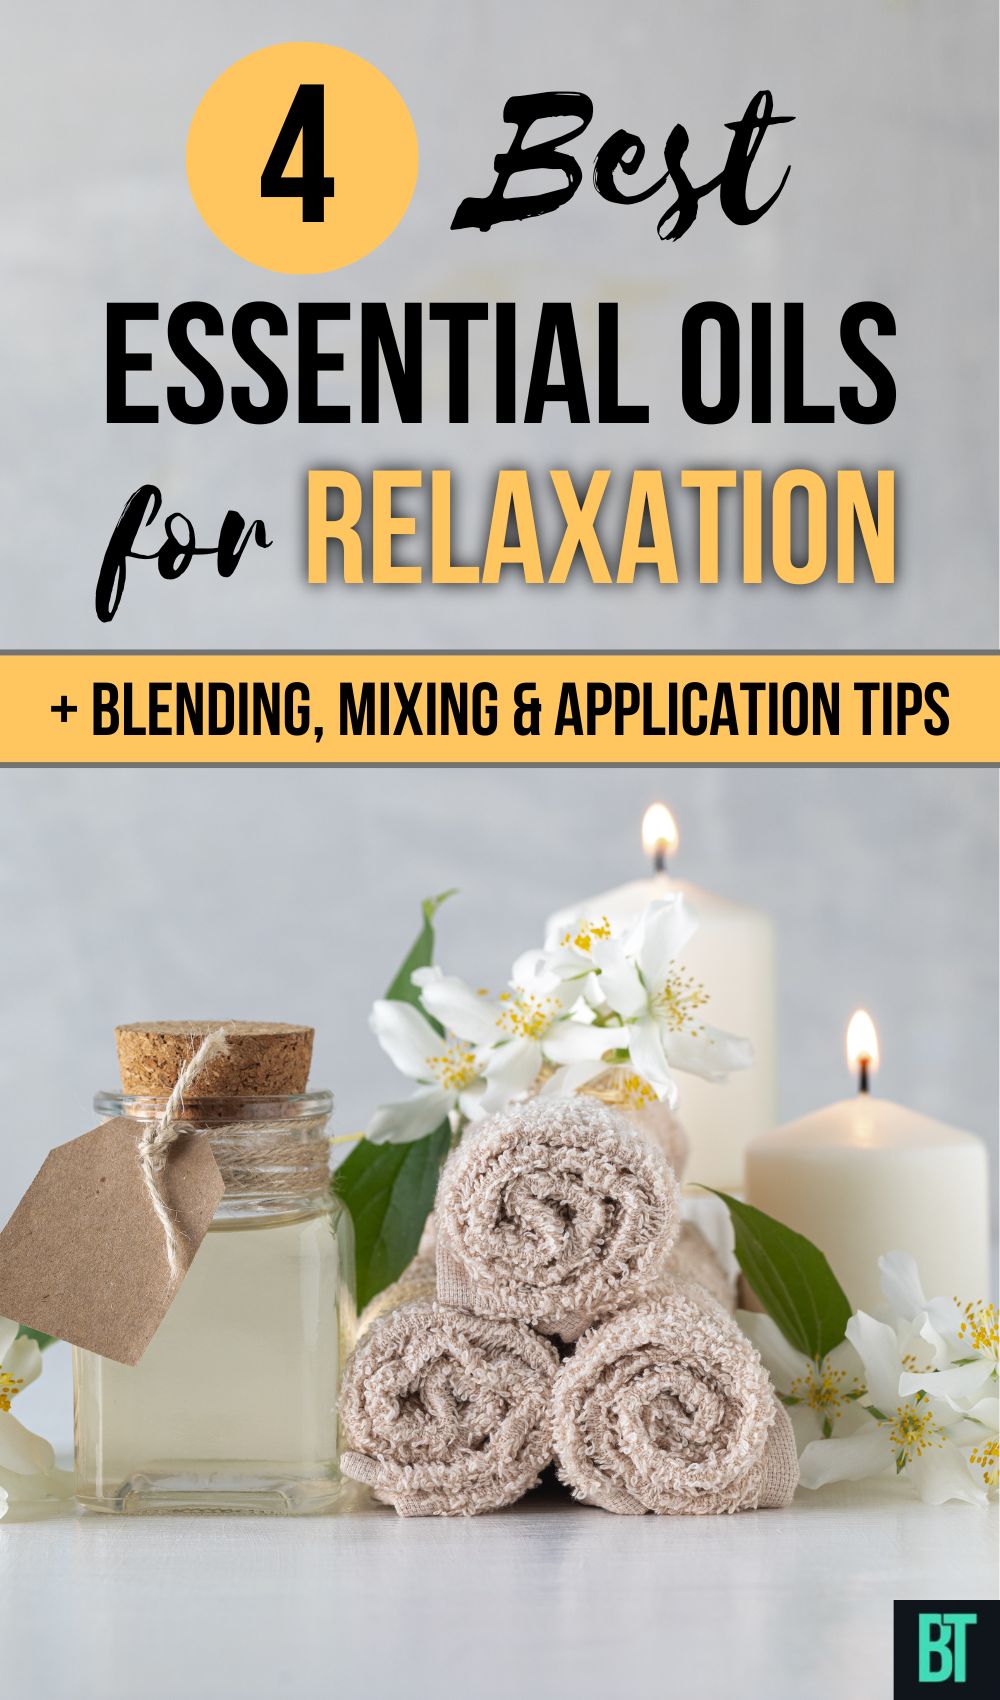 Best Essential Oils for Relaxation